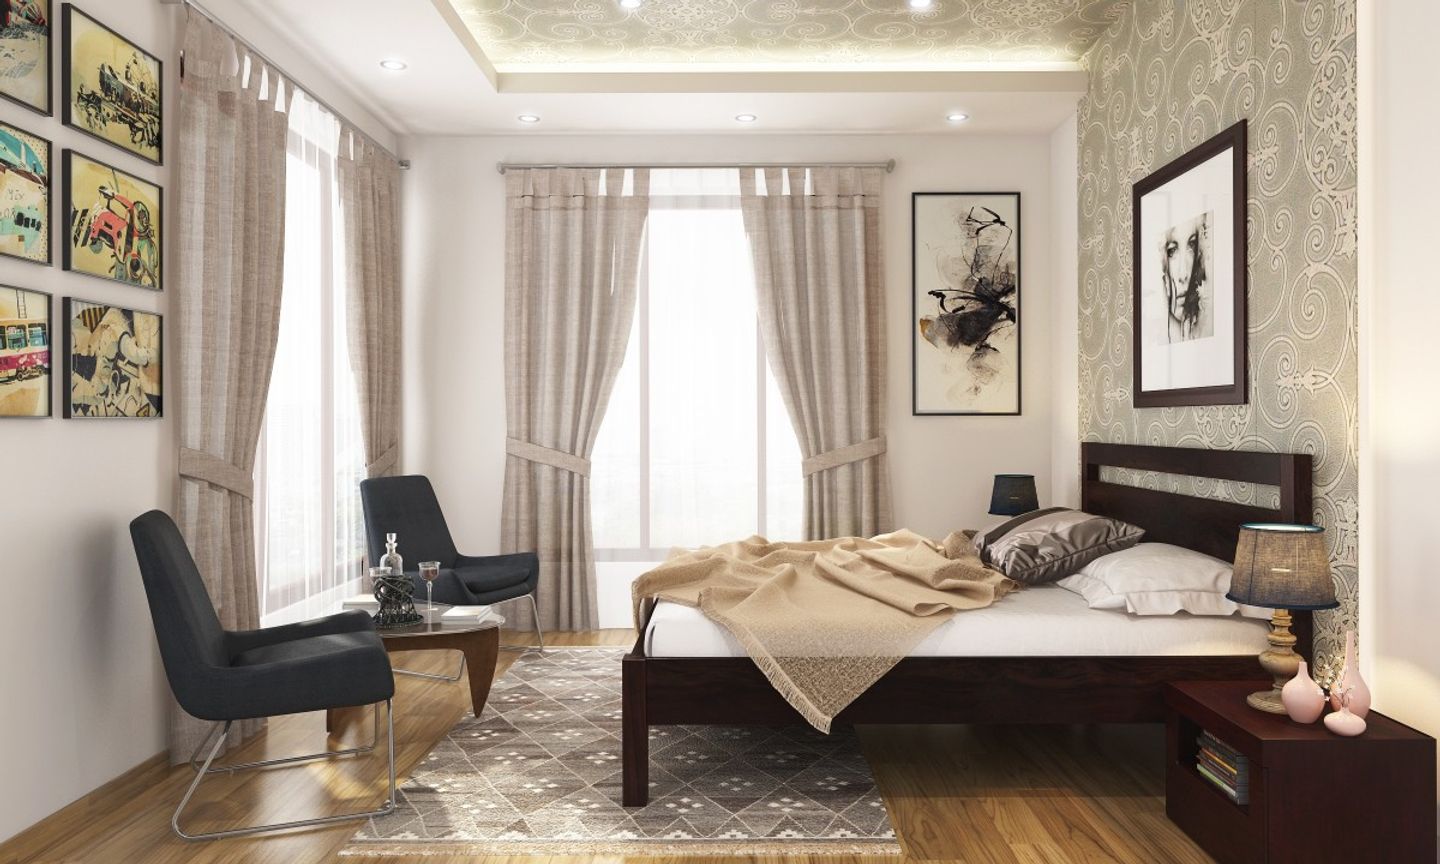 Contemporary Master Bedroom Design With Wall Paintings And Wallpaper